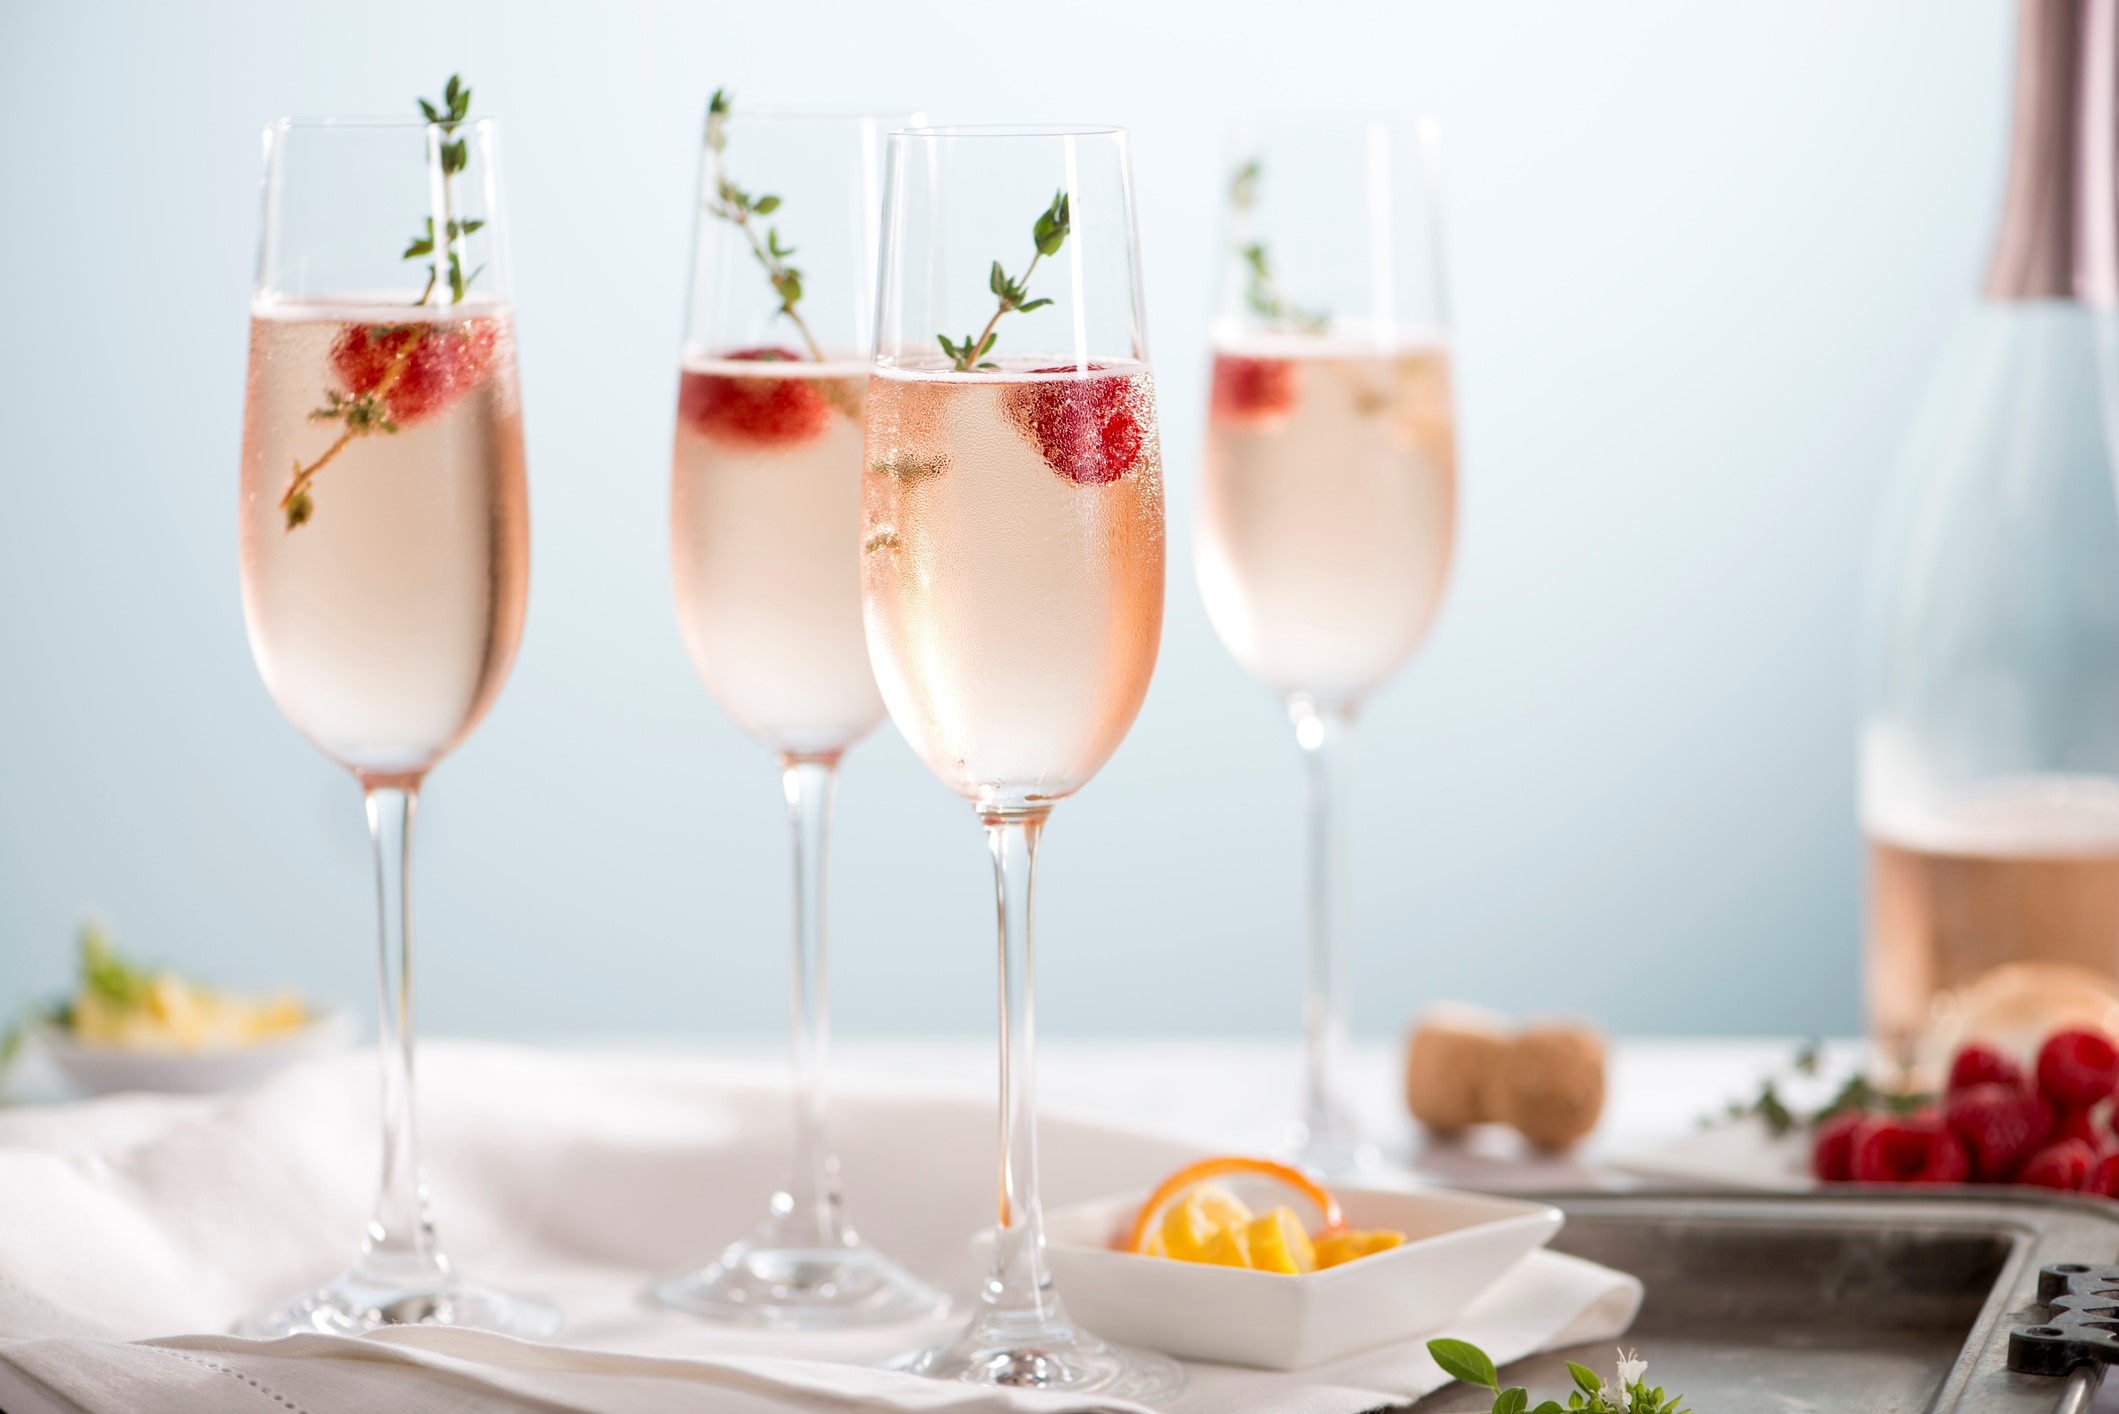 Flutes of pink rose champagne garnished with red raspberries and green thyme make for a festive cocktail gathering.